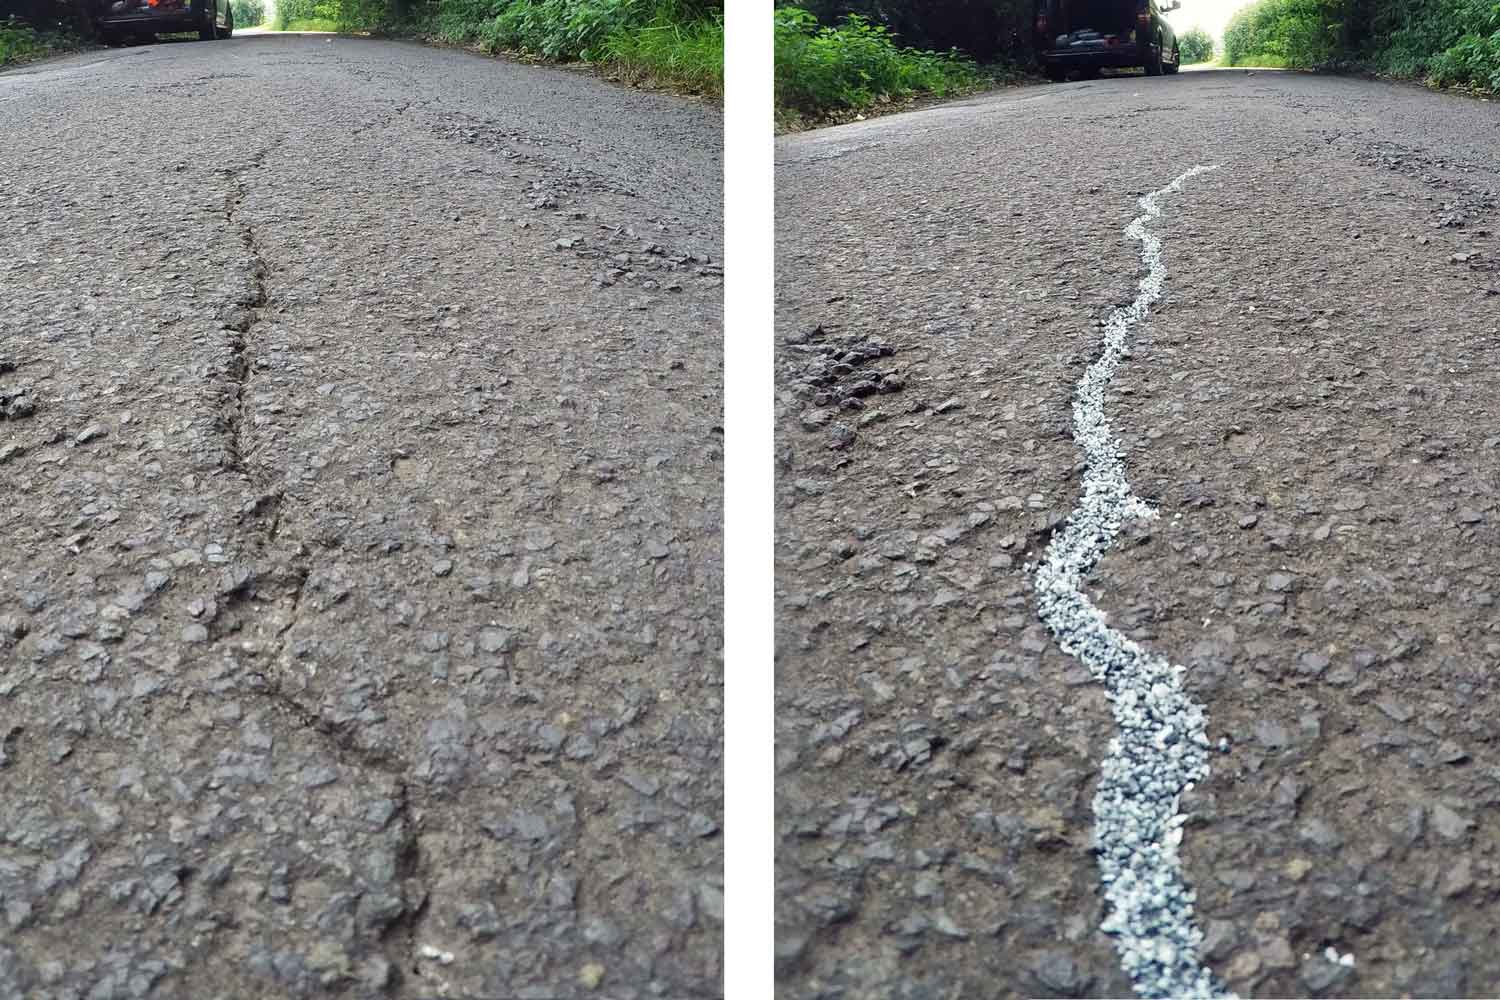 Fine Crack That Would have turned into a pothole